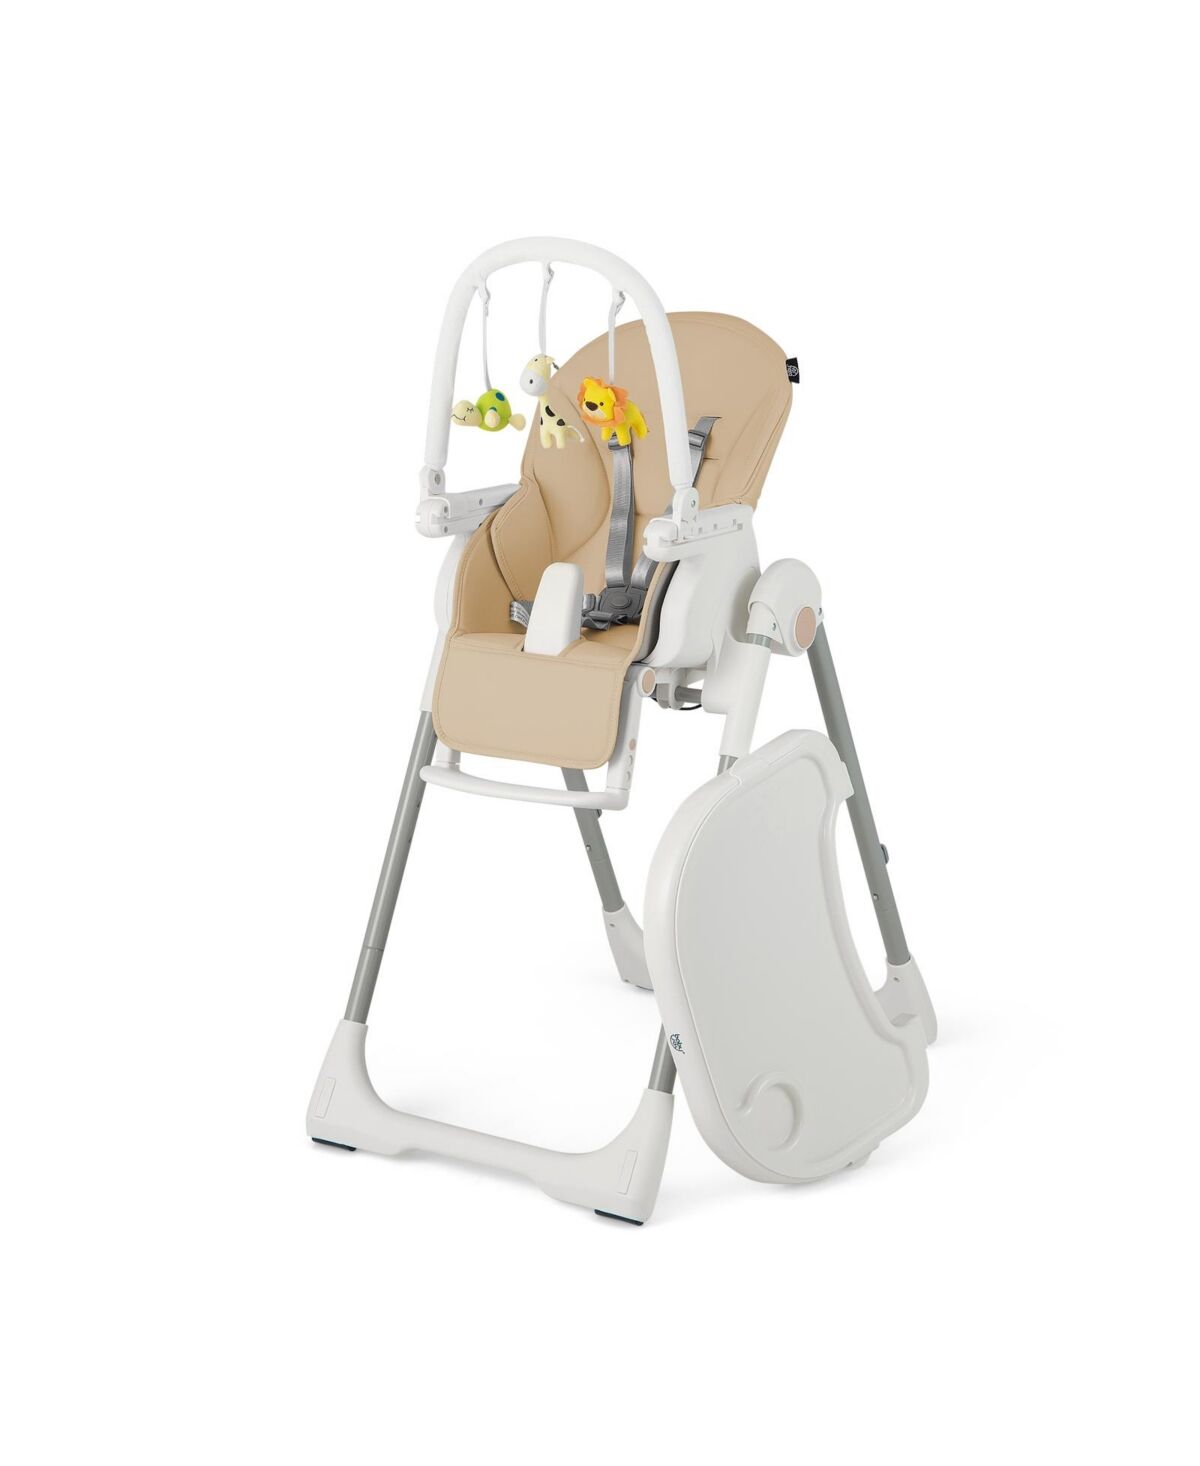 Slickblue 4-in-1 Foldable Baby High Chair with 7 Adjustable Heights and Free Toys Bar - Yellow